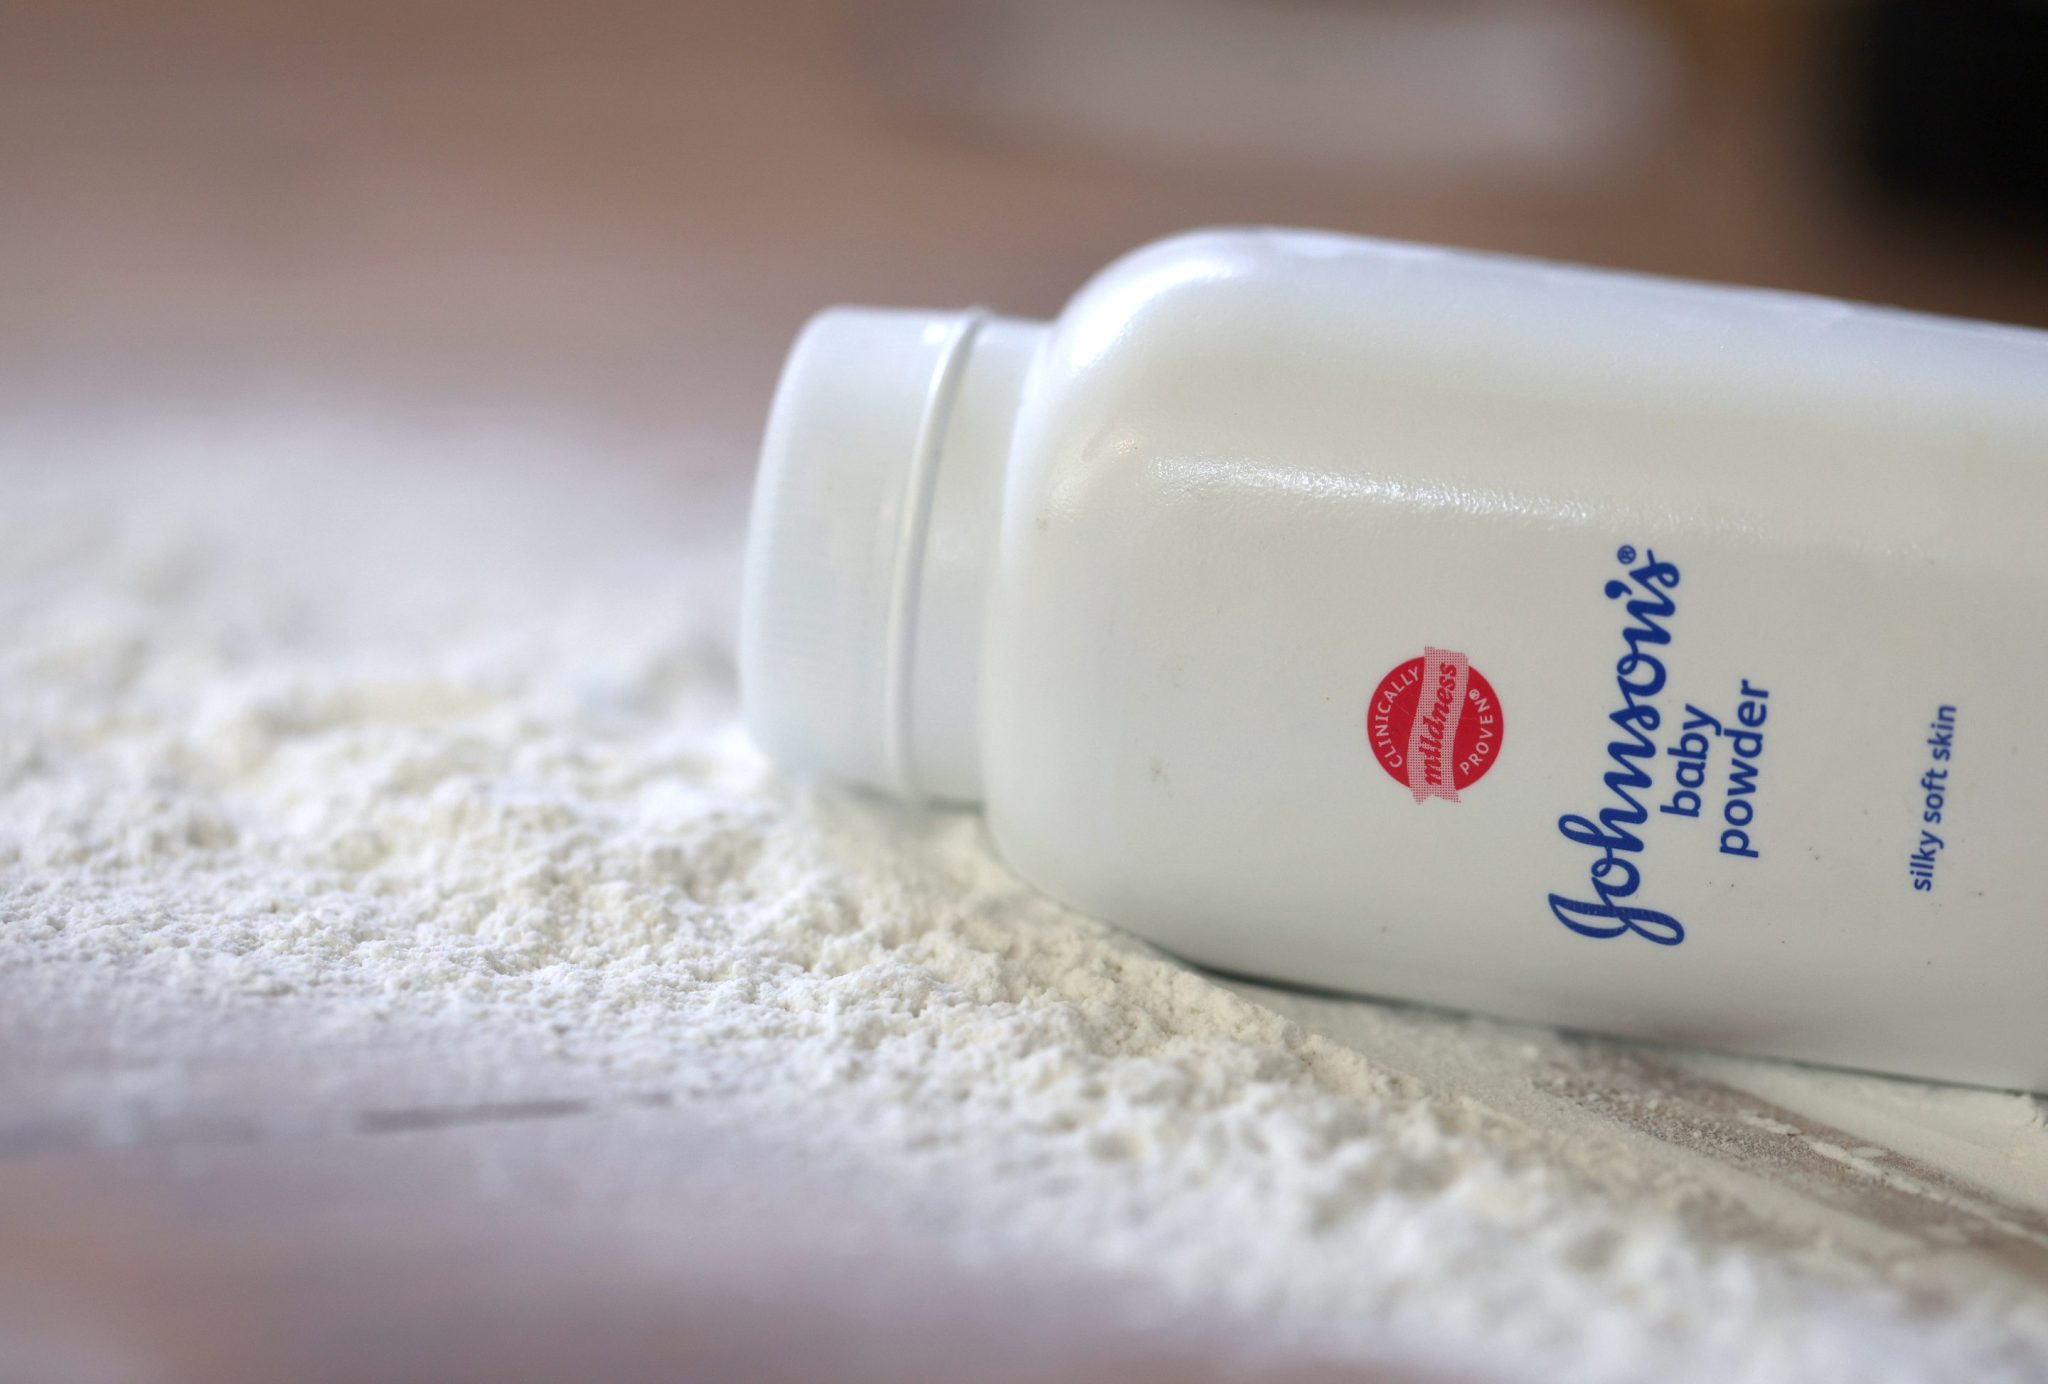 Johnson & Johnson hit by 11,000 more lawsuits linking Baby Powder to cancer after judge throws $9 billion settlement case